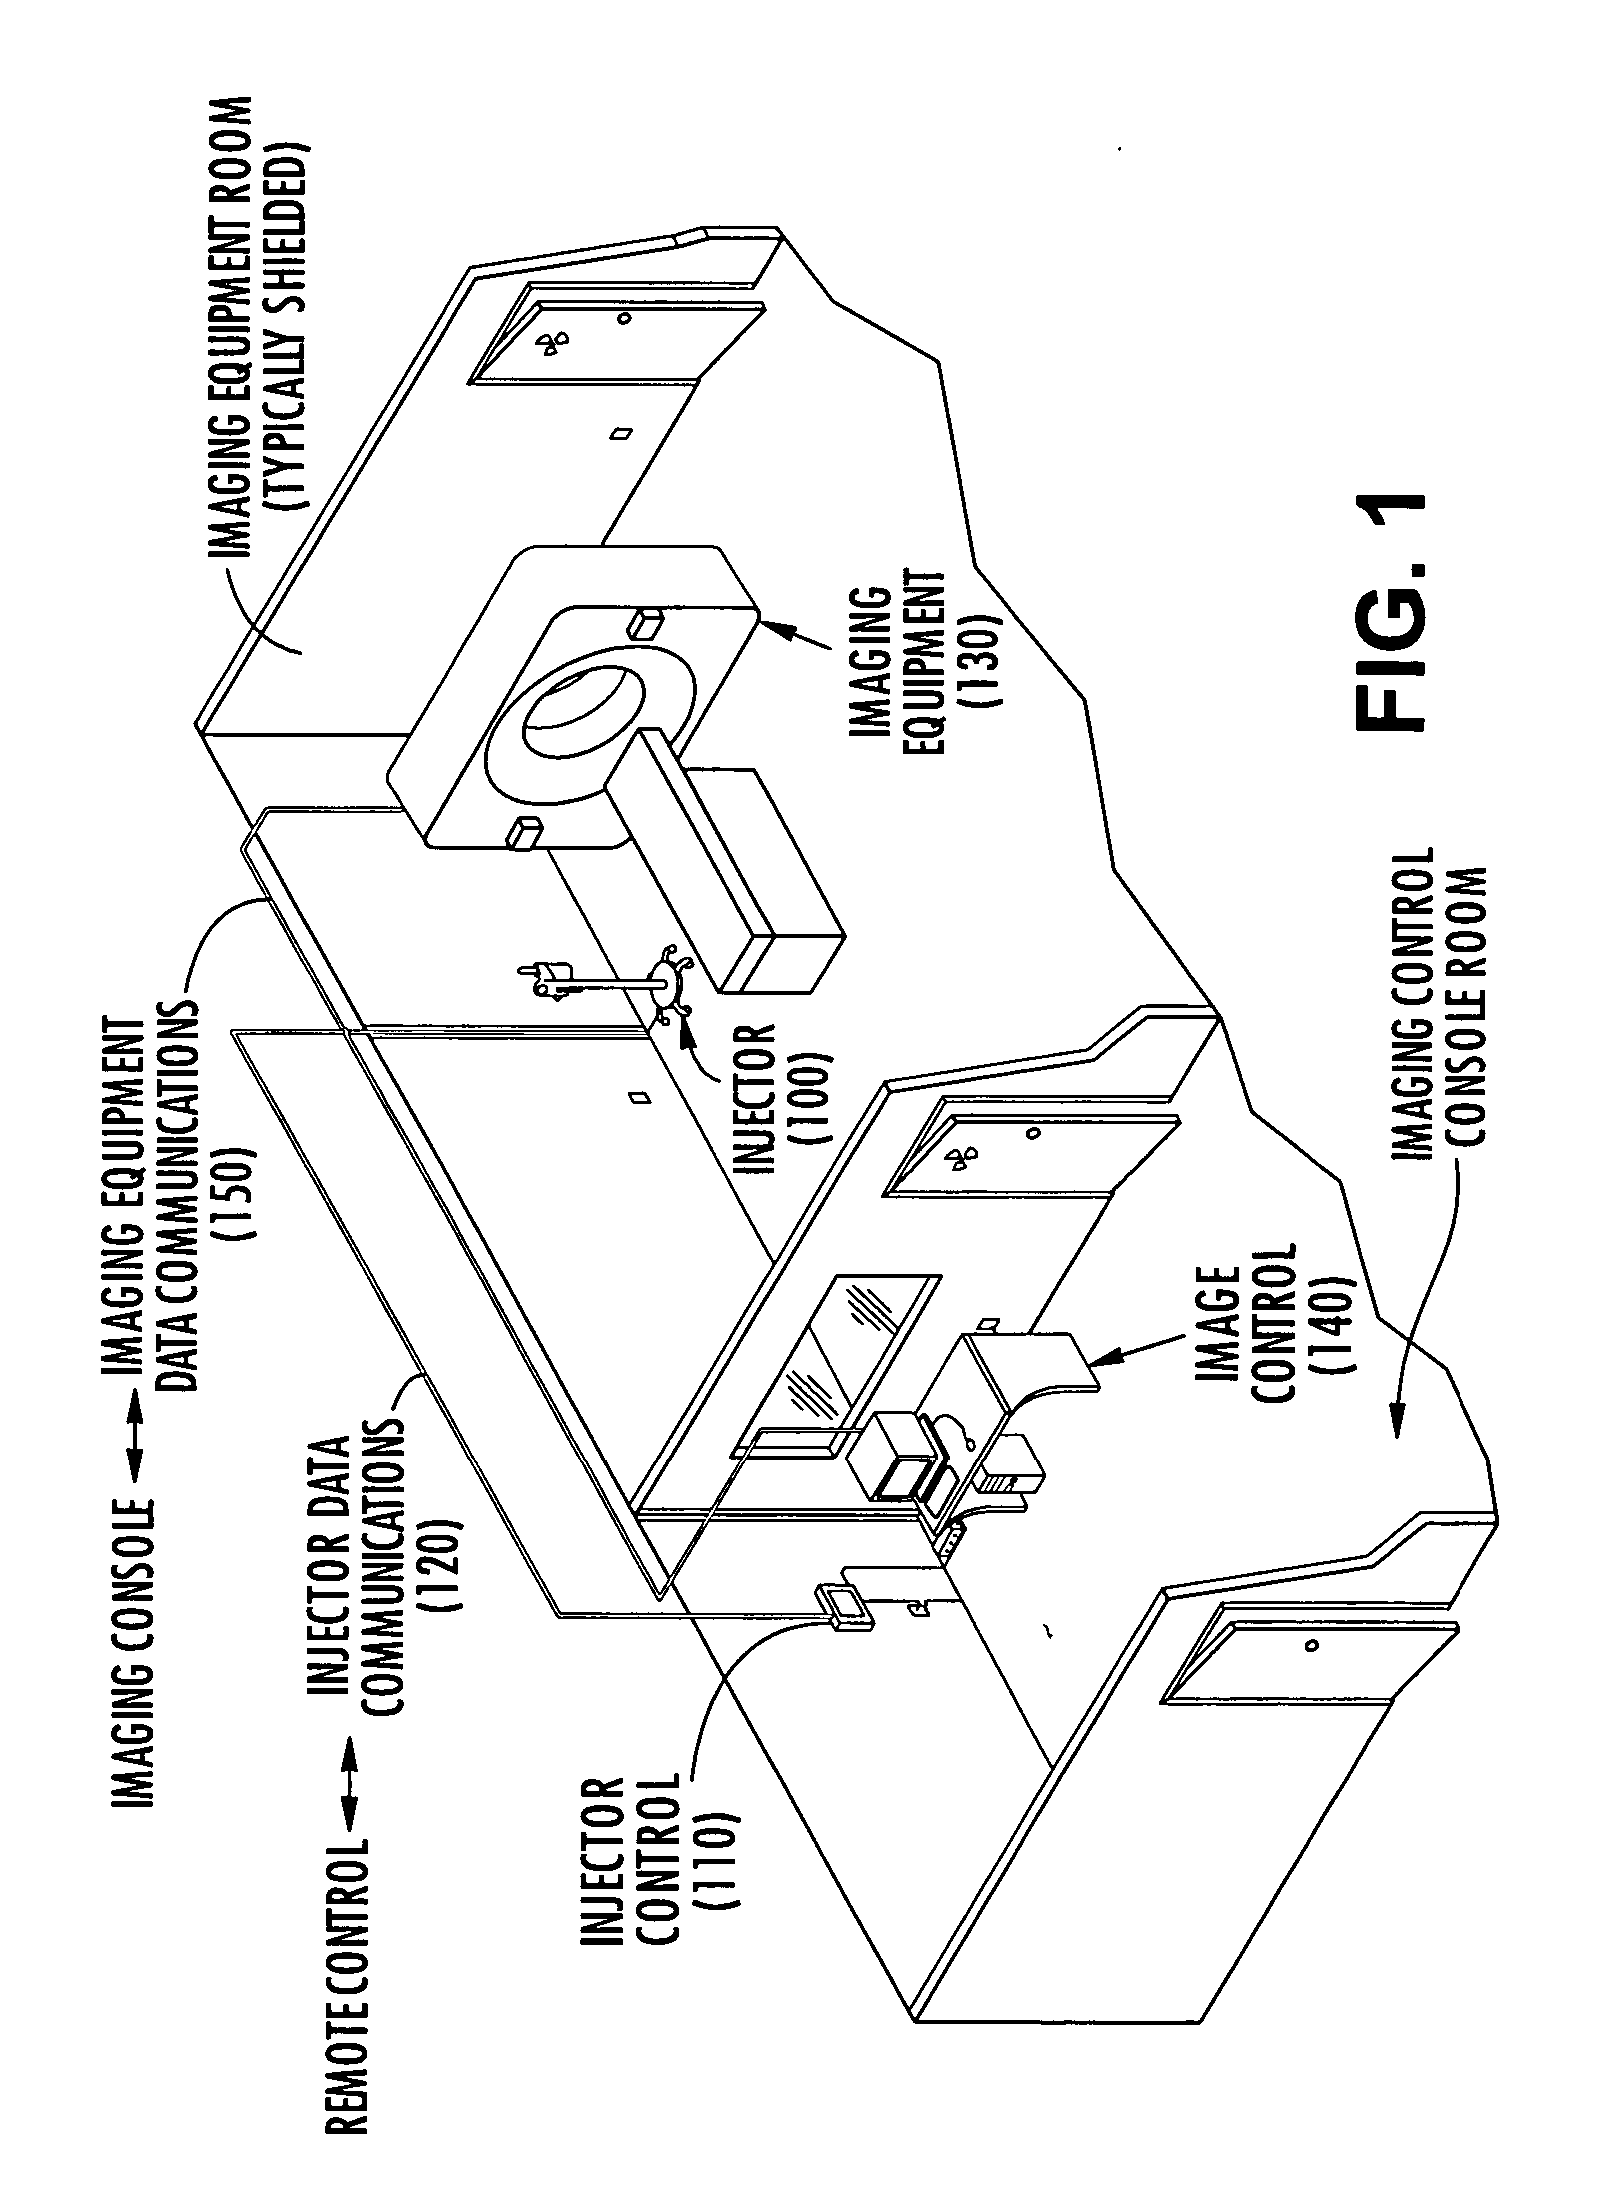 Method system and apparatus for operating a medical injector and diagnostic imaging device